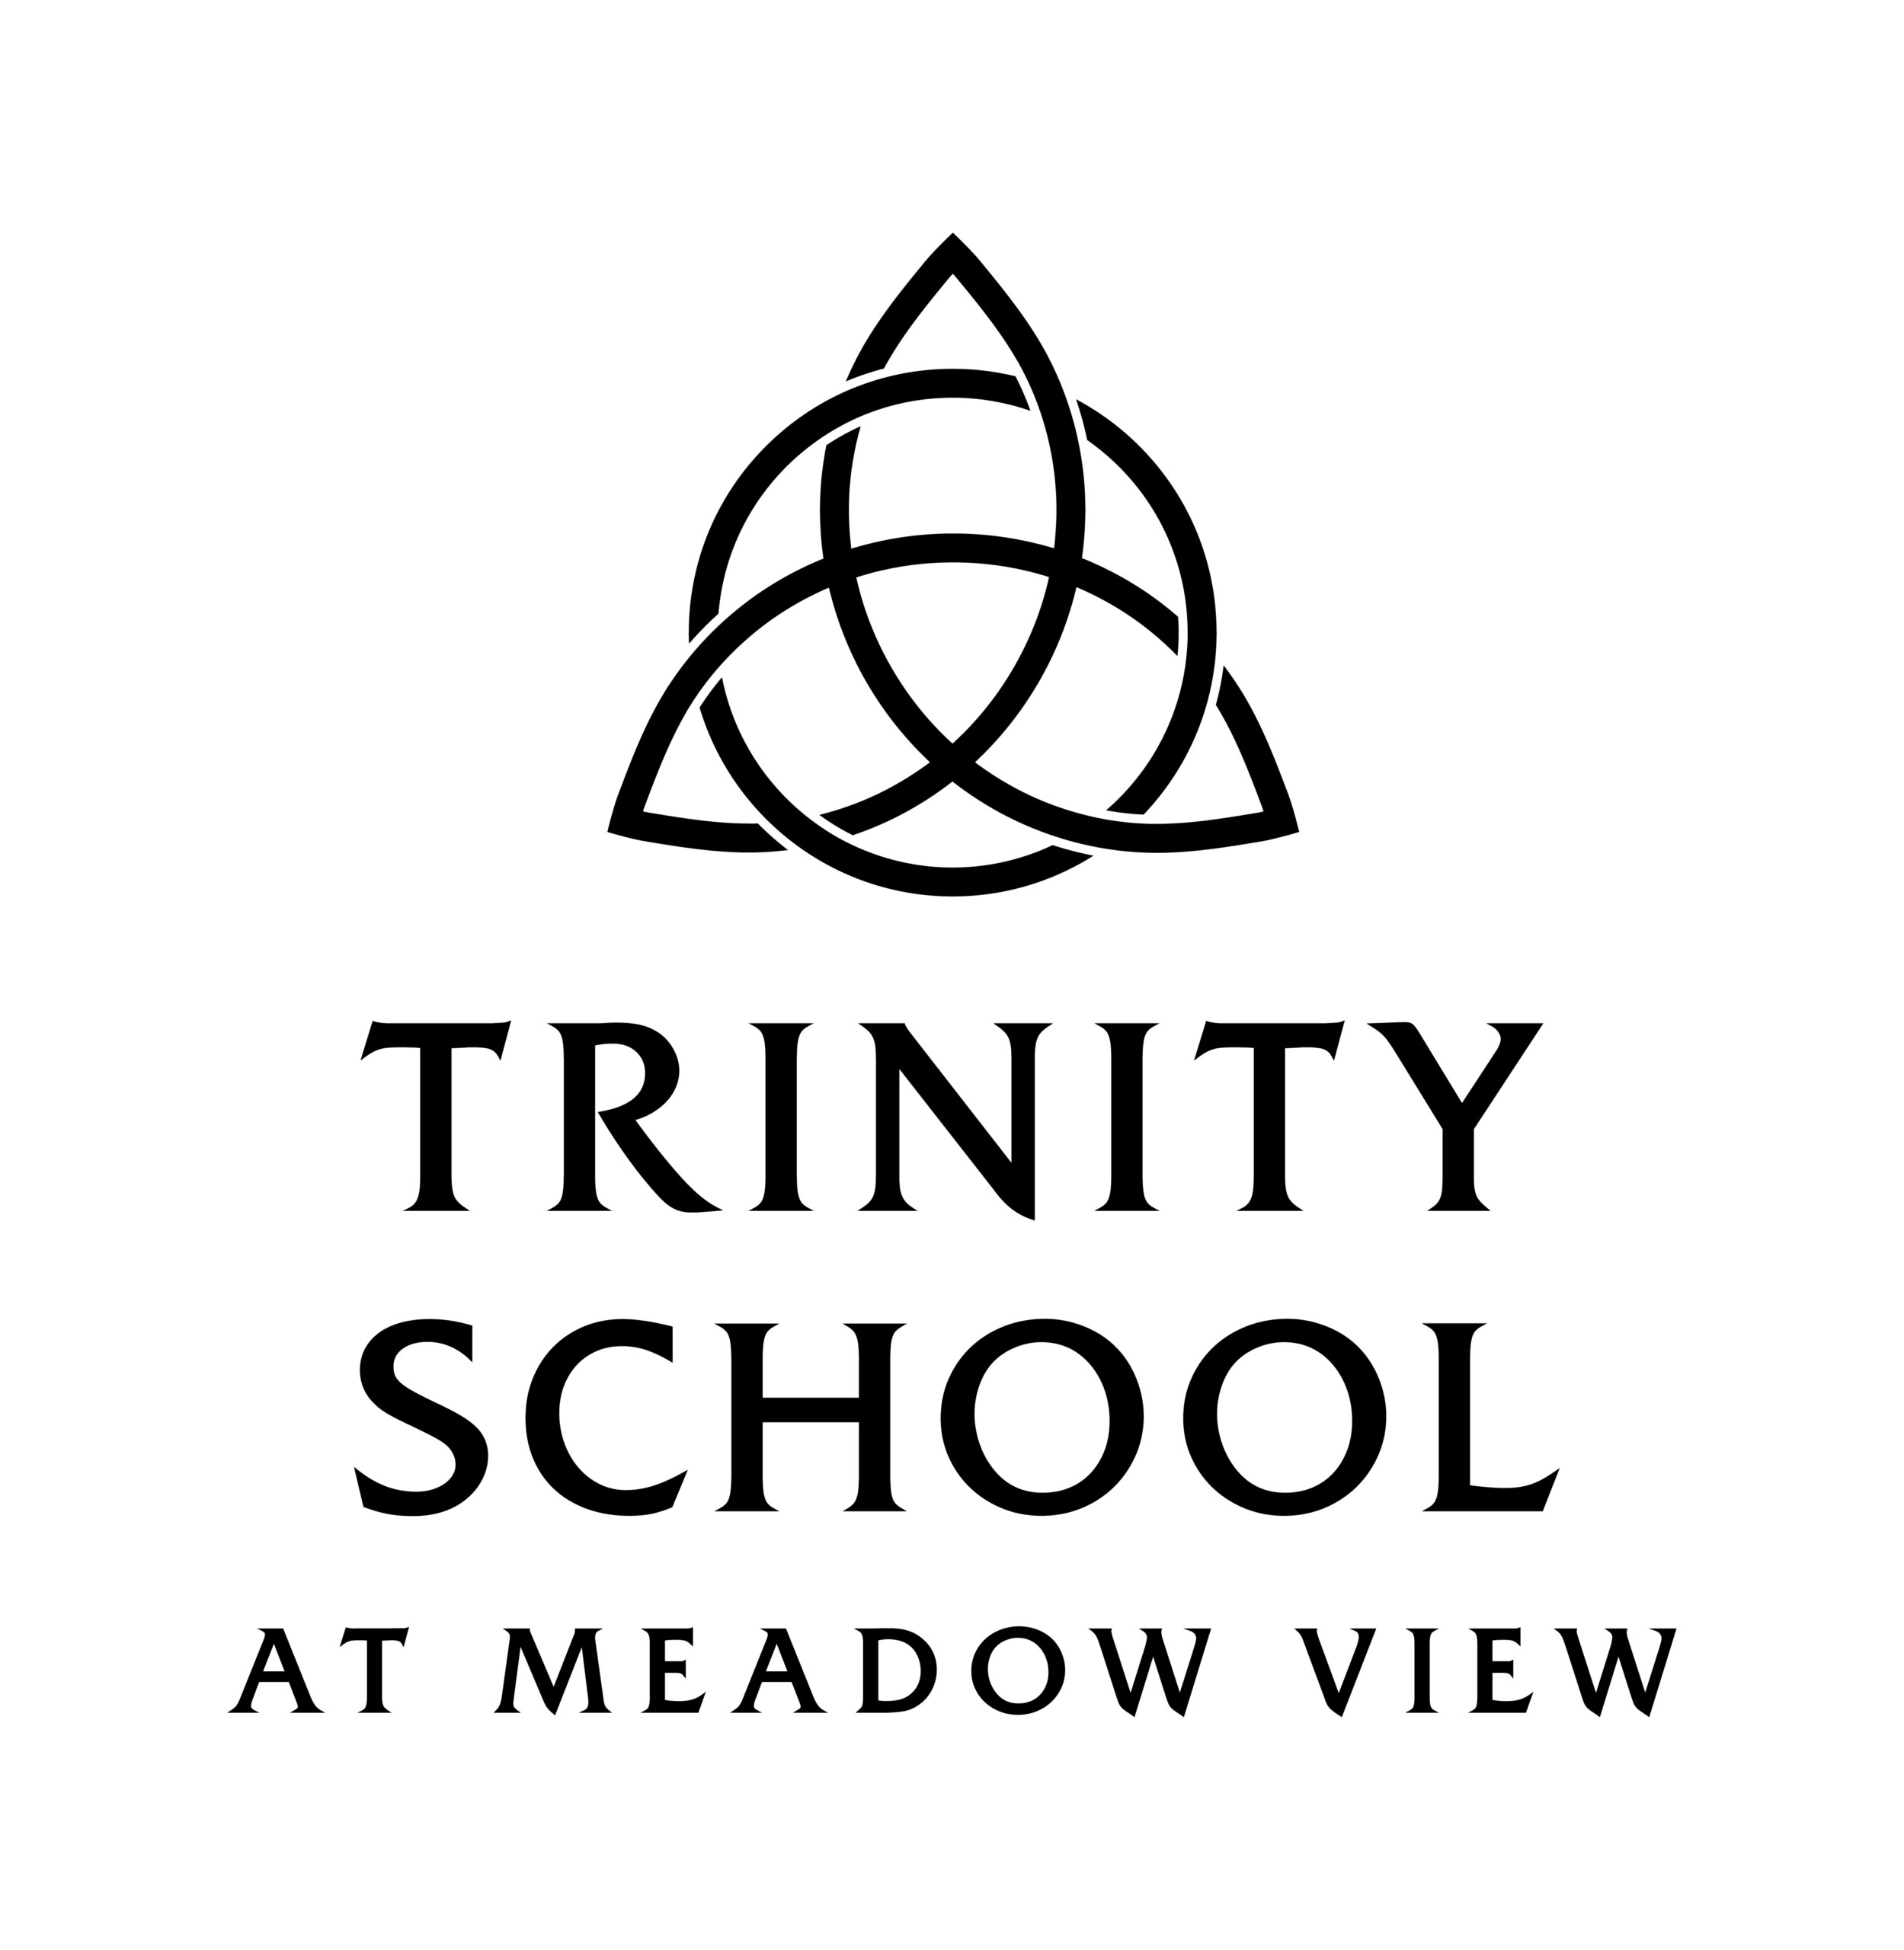 Trinity School at Meadow View